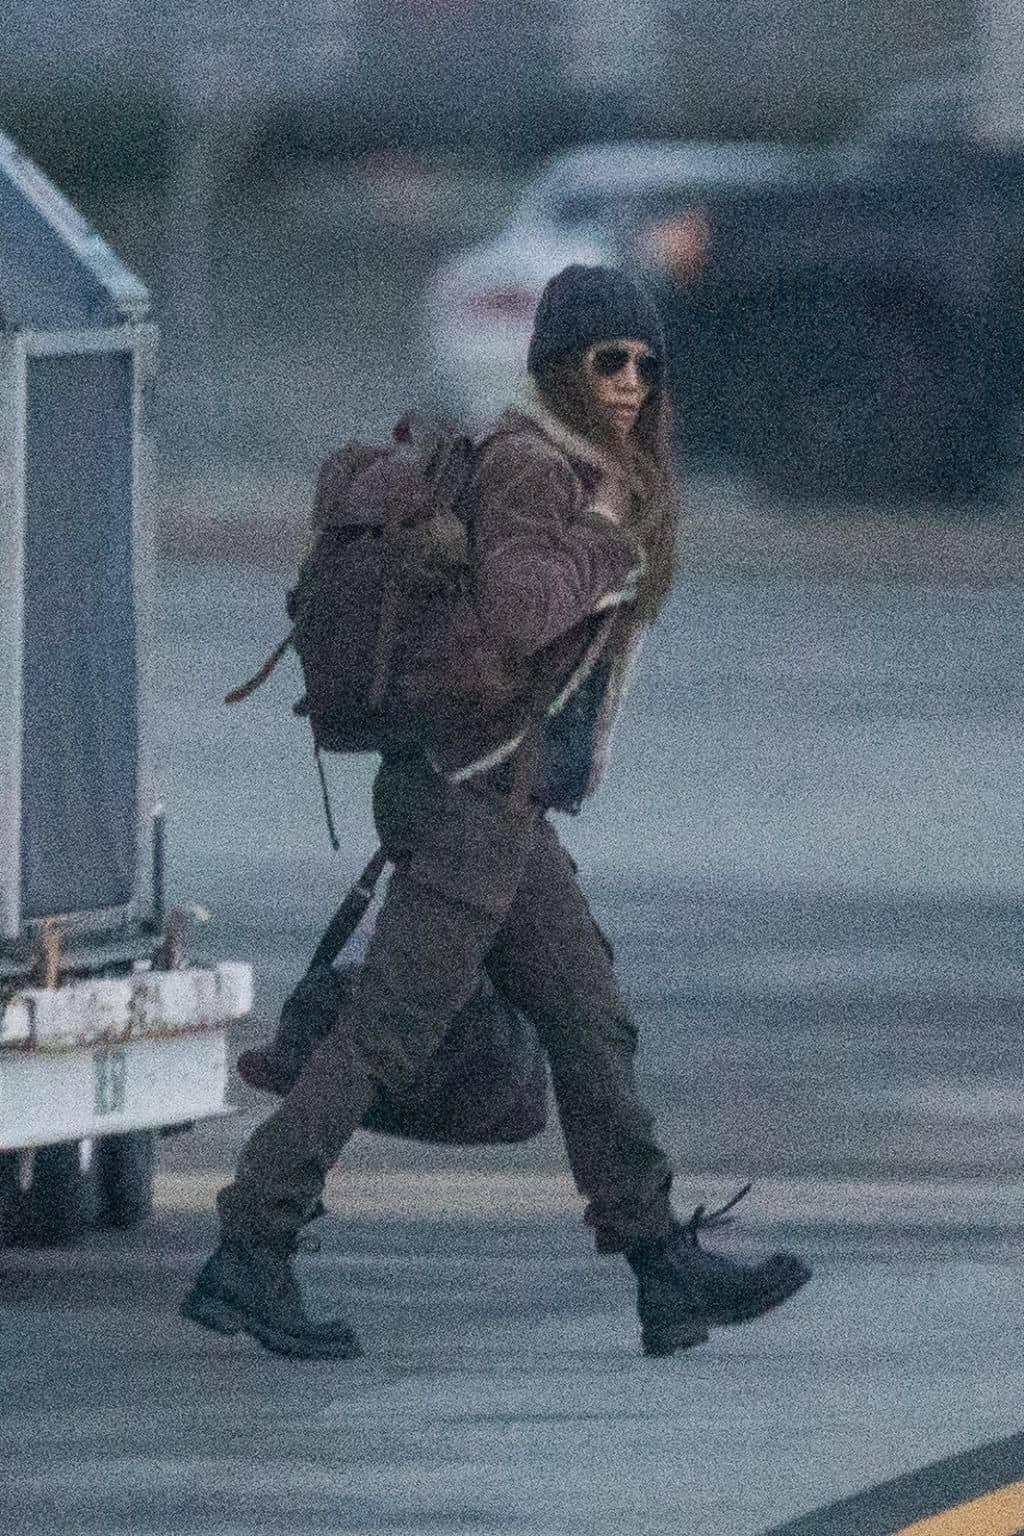 Jennifer Lopez Donned a Rugged Look on the Set of “The Mother” in Vancouver